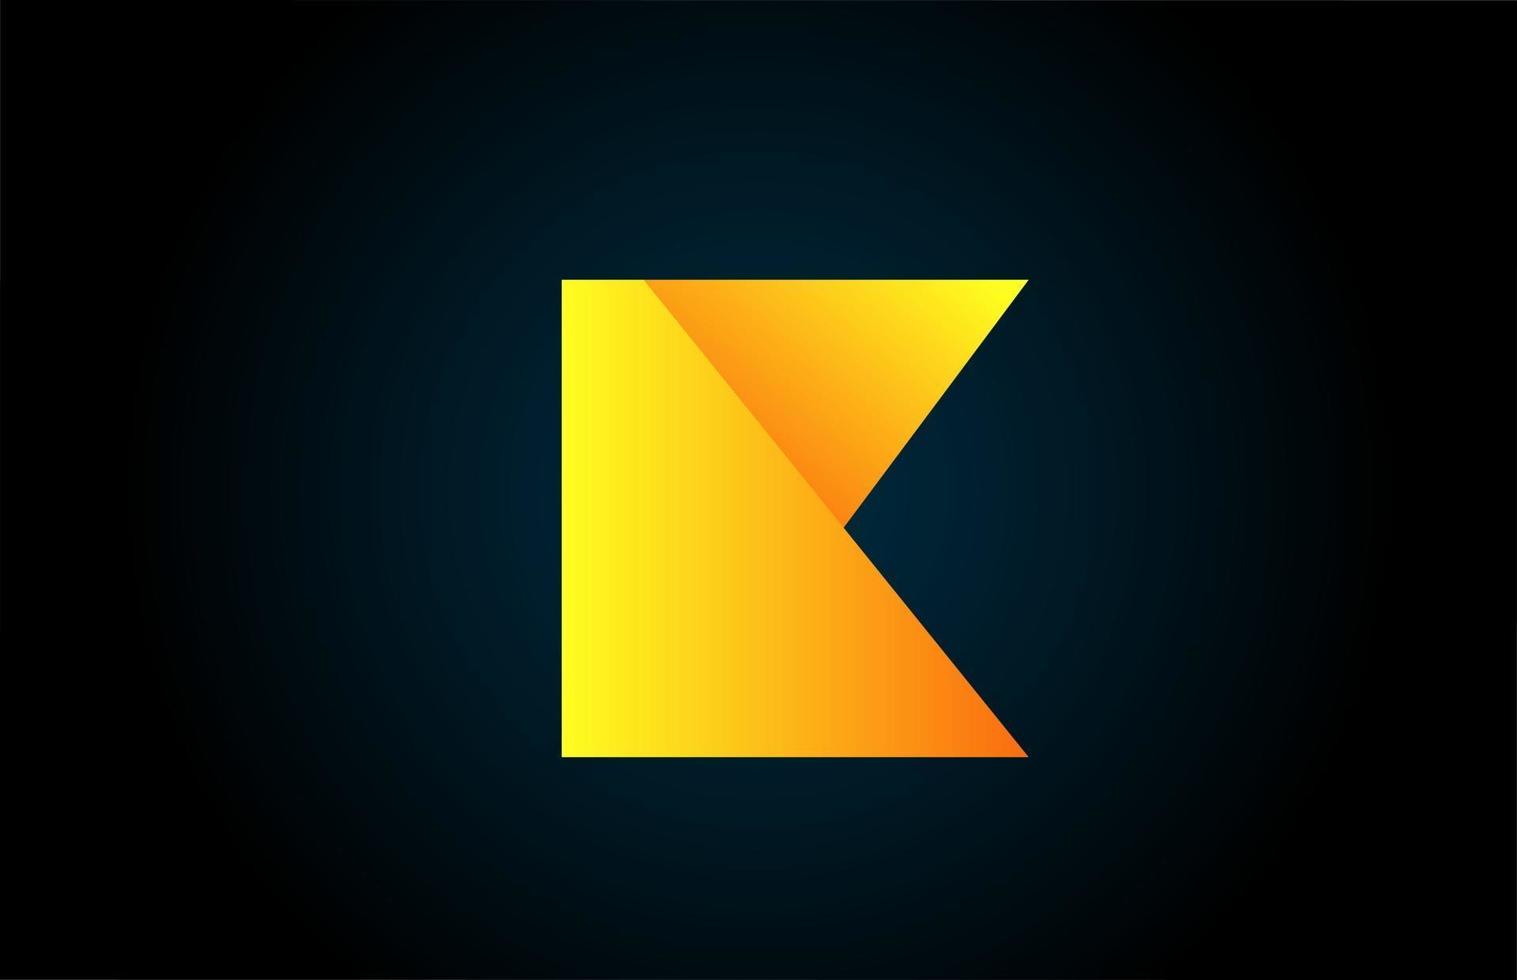 geometric alphabet K letter logo for business and company with yellow color. Corporate brading and lettering with futuristic design and gradient vector